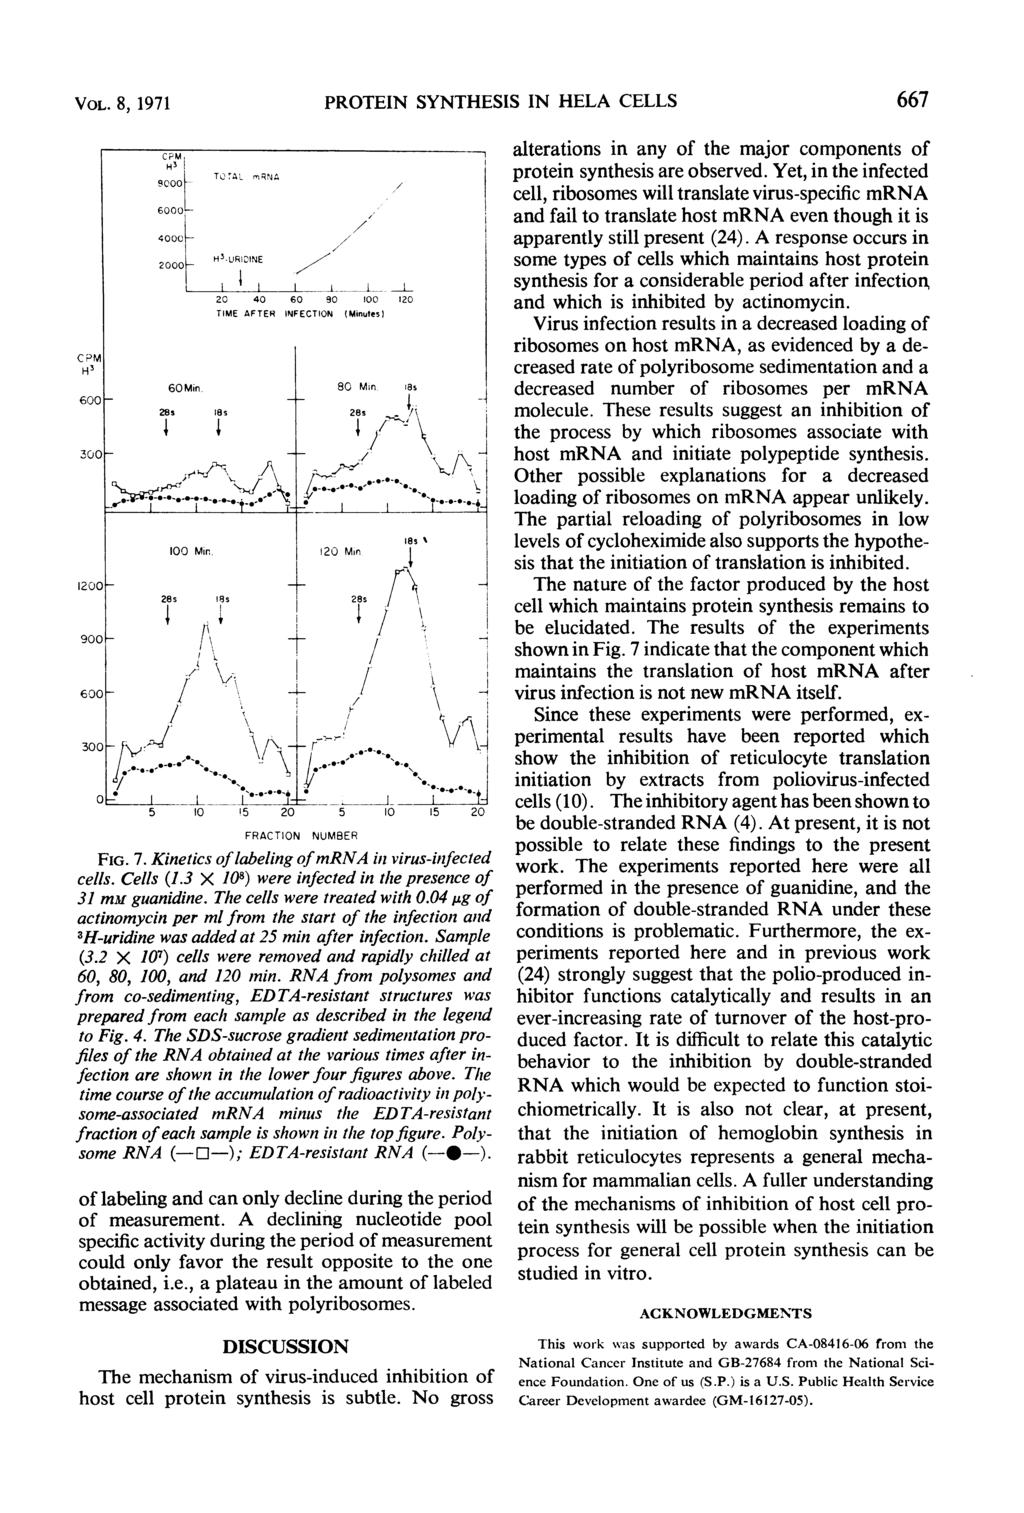 VOL. 8, 1971 O LkI-*I t 5 10!5 20 5 10 15 20 FRACTION PROTEIN SYNTHESIS IN HELA CELLS NUMBER FIG. 7. Kinetics oflabeling ofmrna in virus-infected cells. Cells (1.